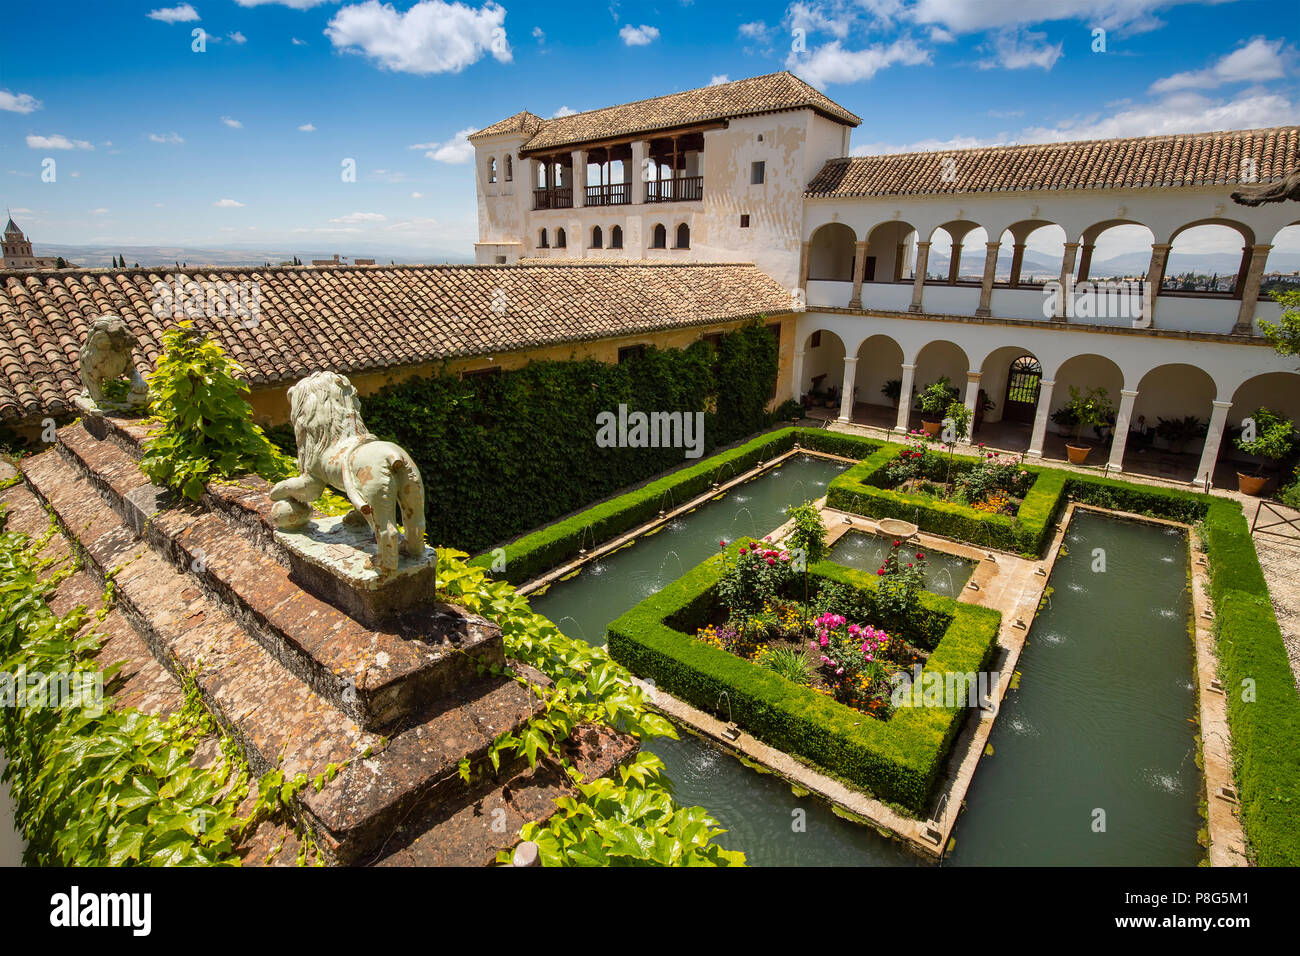 Generalife Palace gardens. Alhambra, UNESCO World Heritage Site. Granada City. Andalusia, Southern Spain Europe Stock Photo